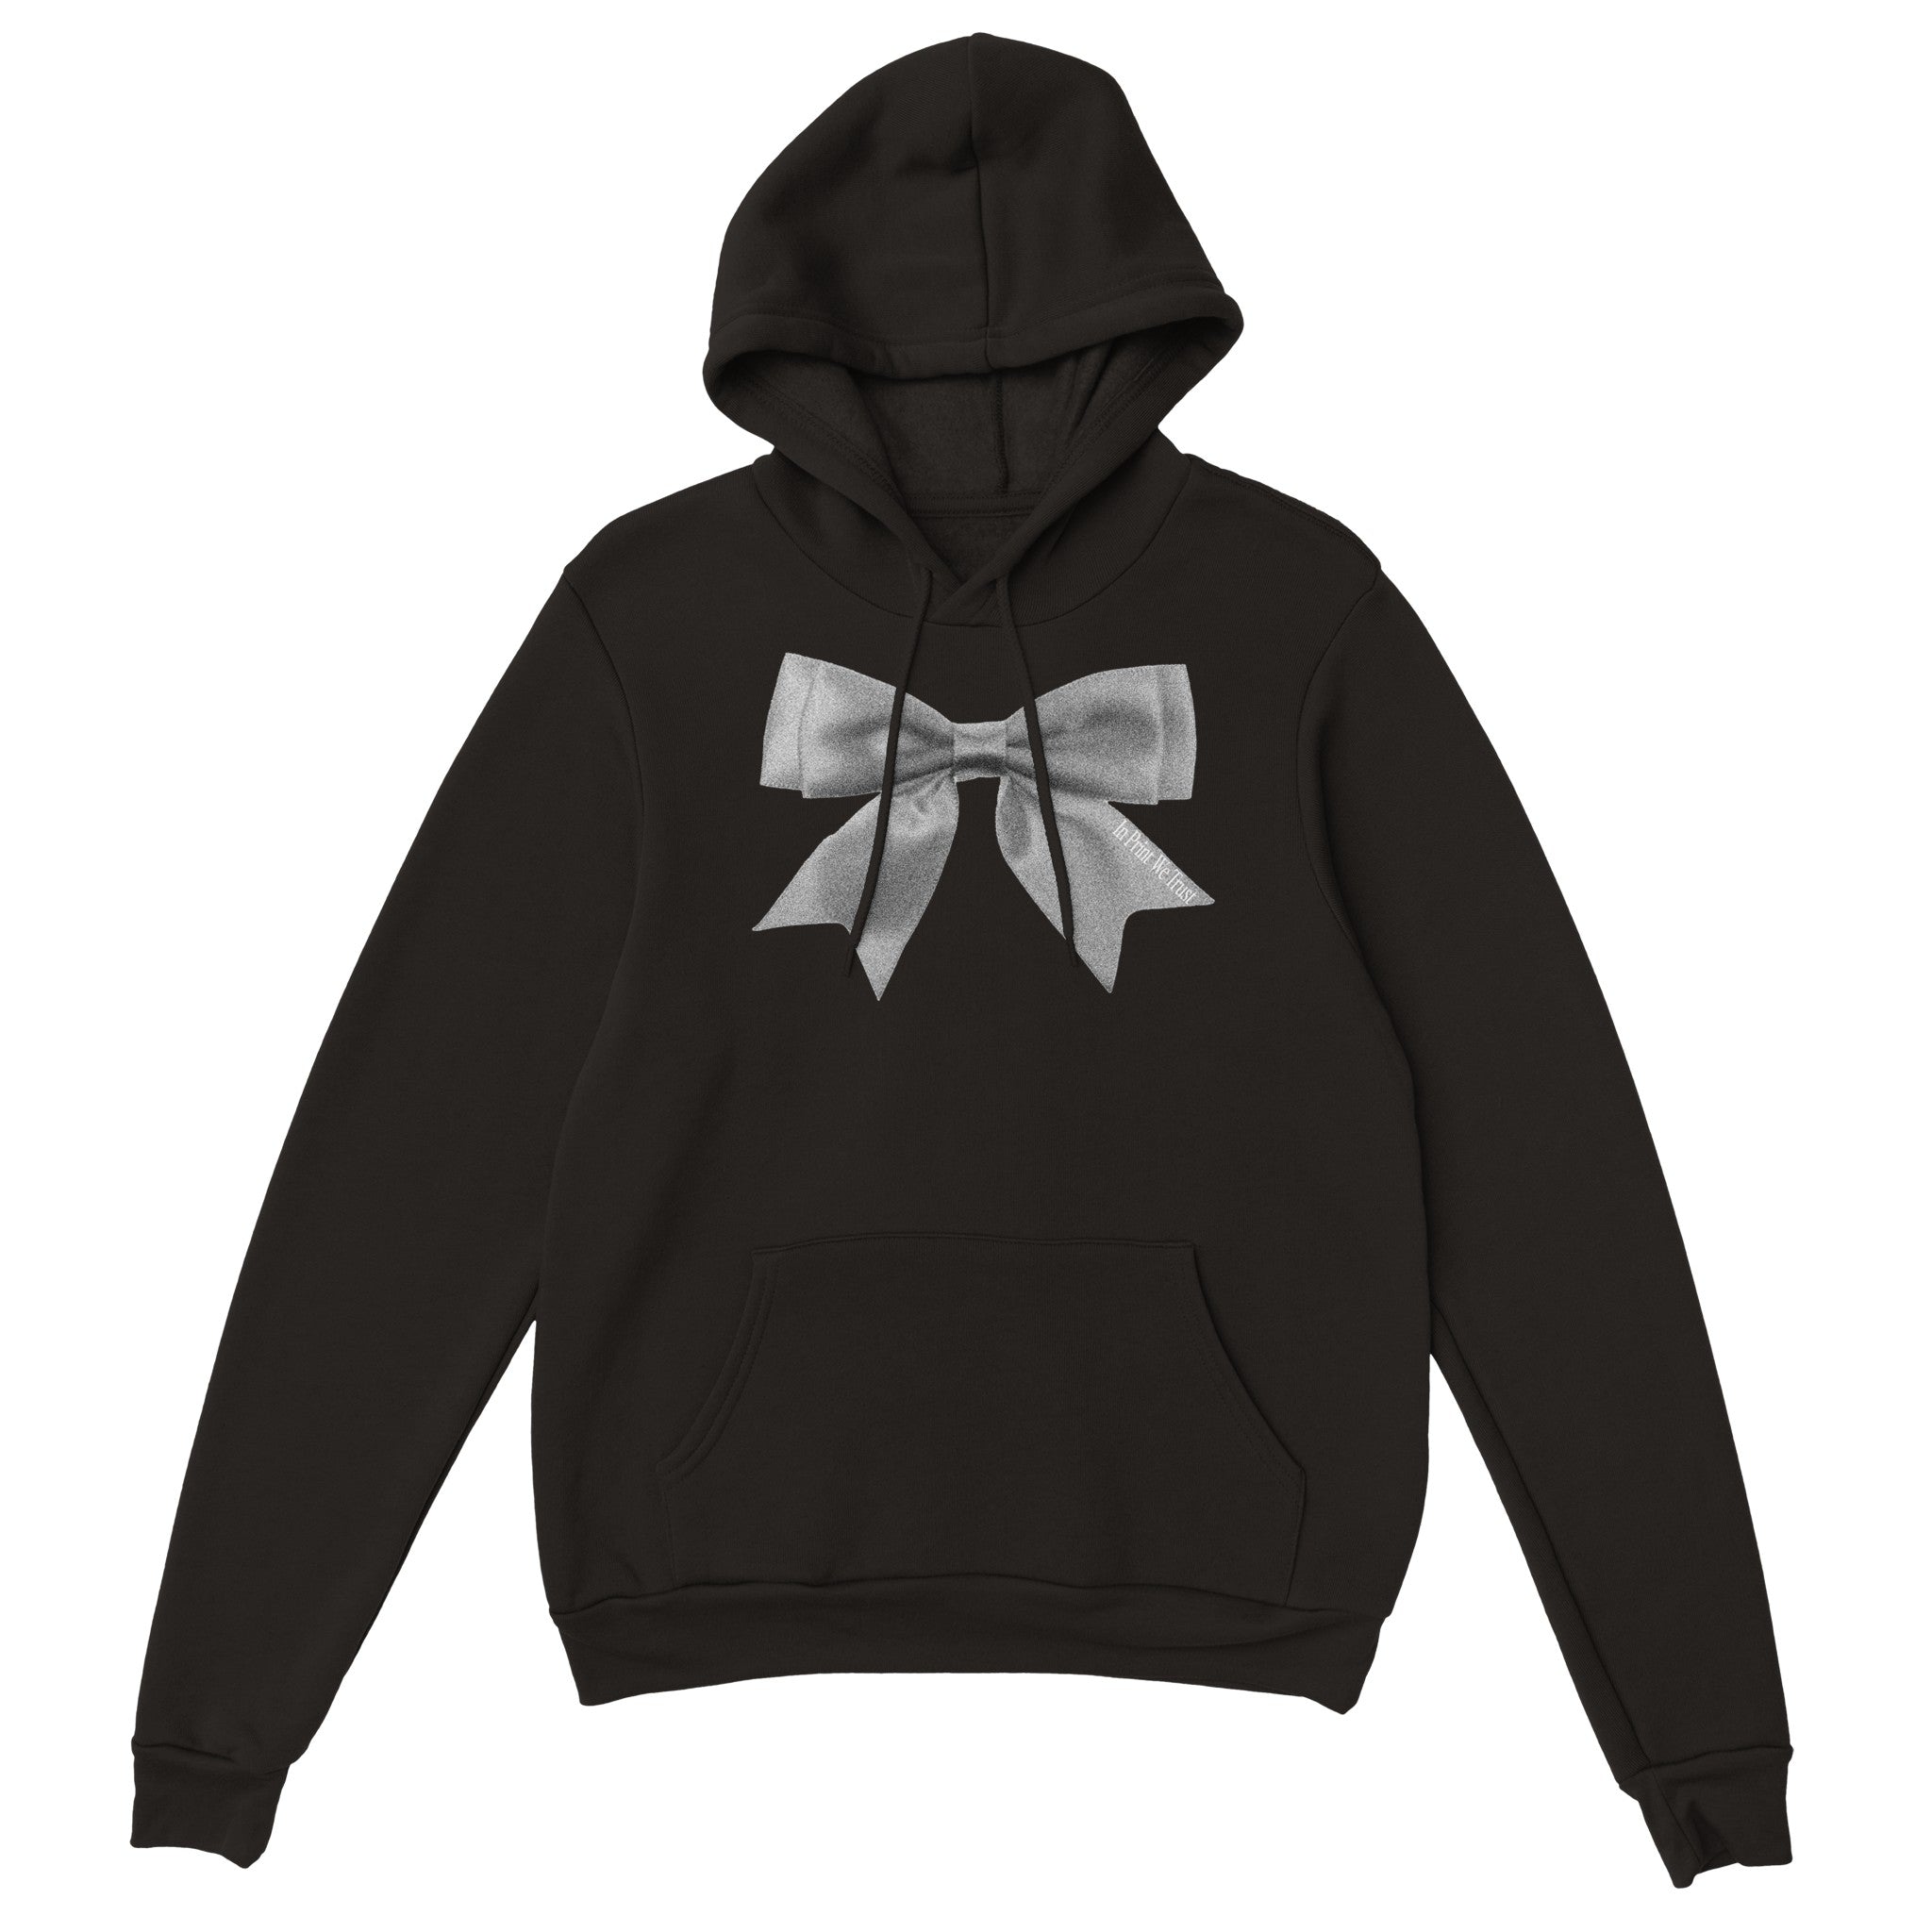 'Put a Bow On It' hoodie - In Print We Trust